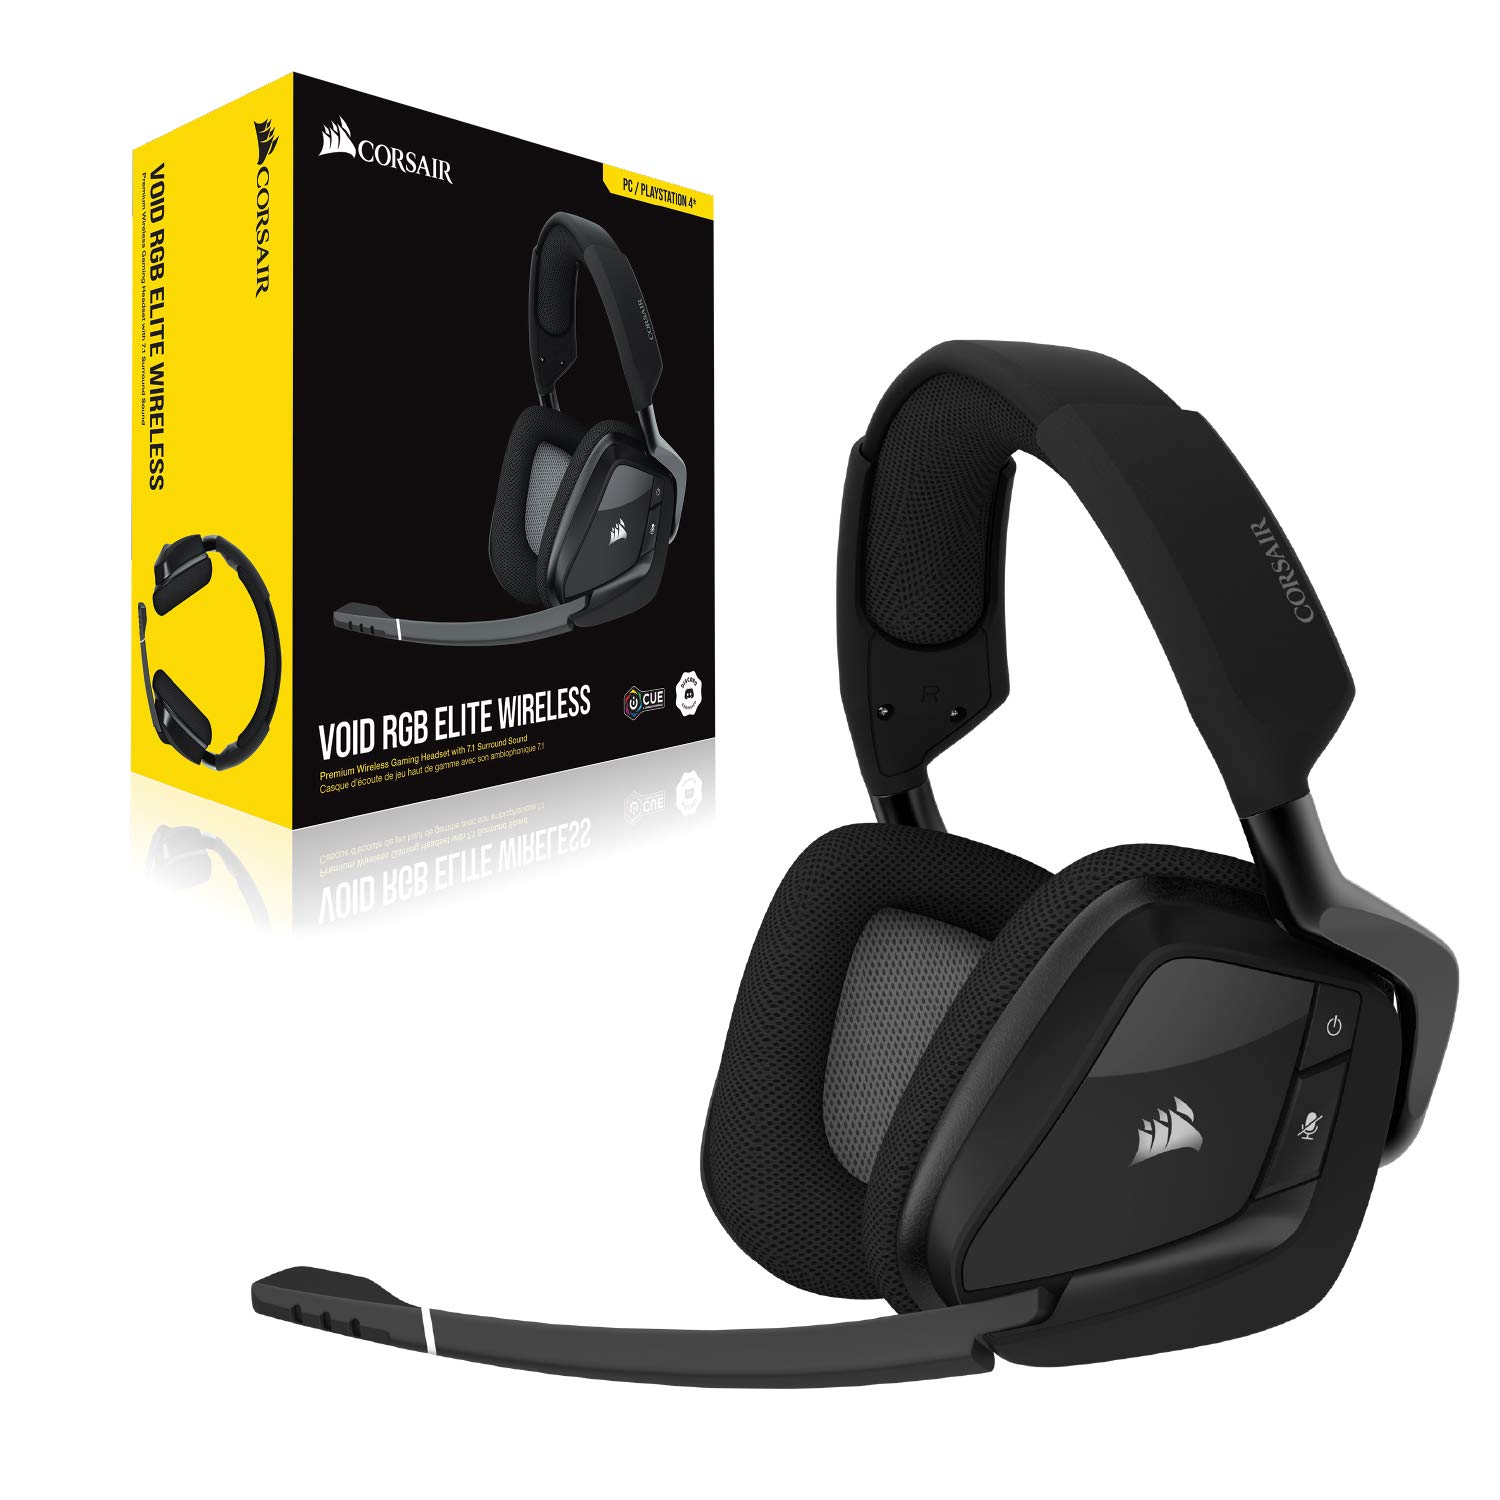 Corsair Void RGB Elite Wireless Premium Gaming Headset with 7.1 Surround Sound - Discord Certified - Works with PC, PS5 and PS4 - Carbon (CA-9011201-NA), Black